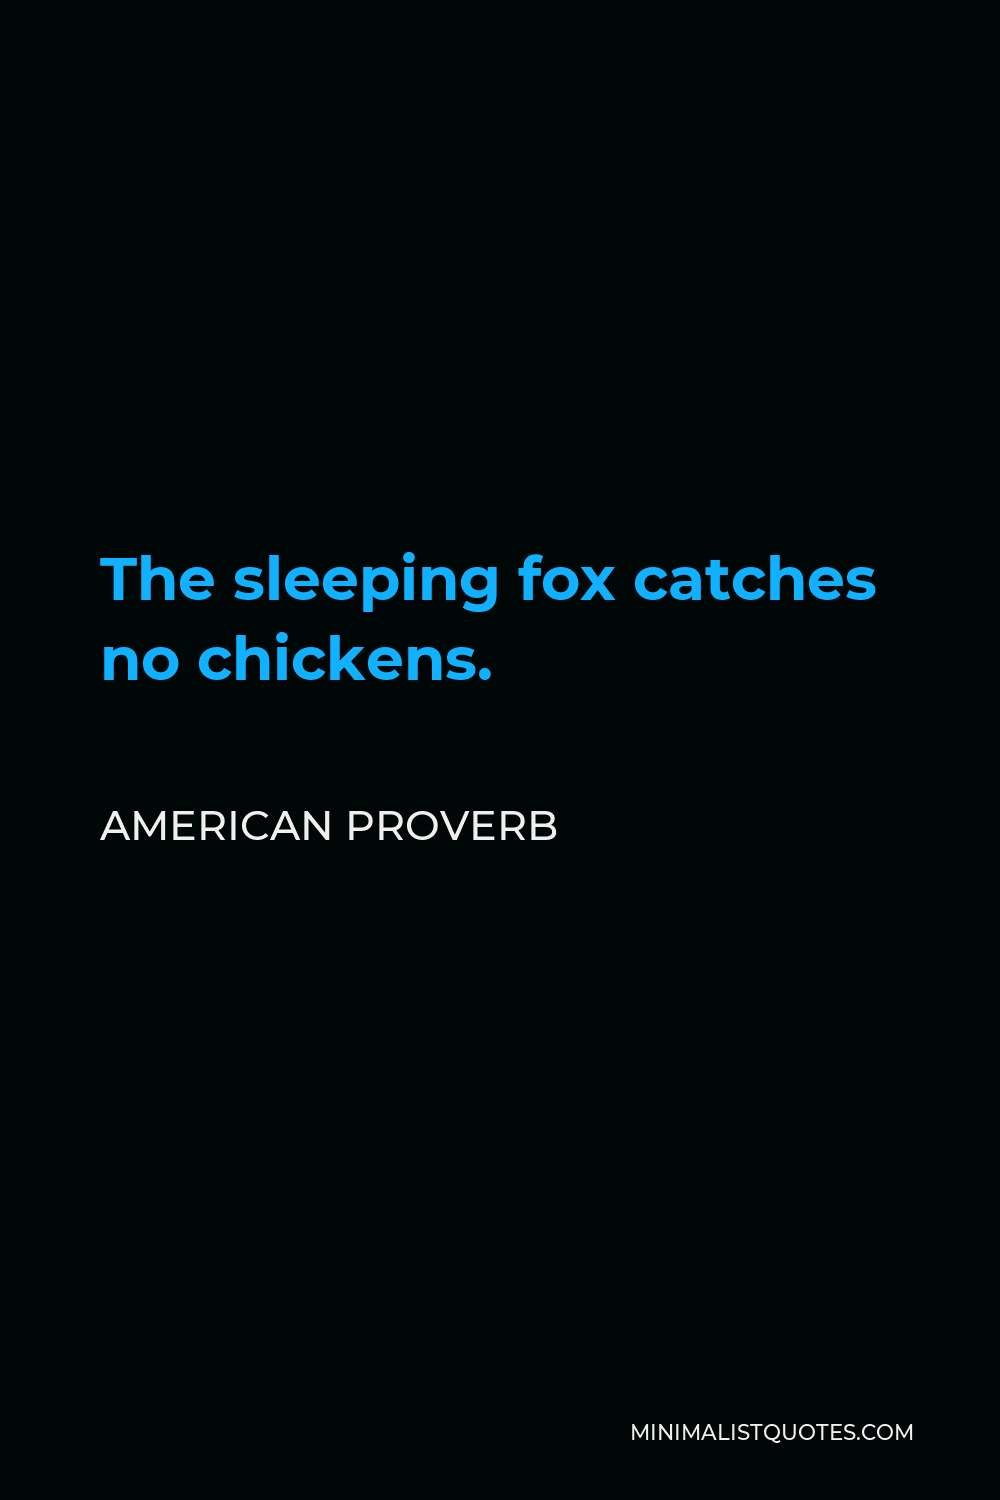 American Proverb Quote - The sleeping fox catches no chickens.